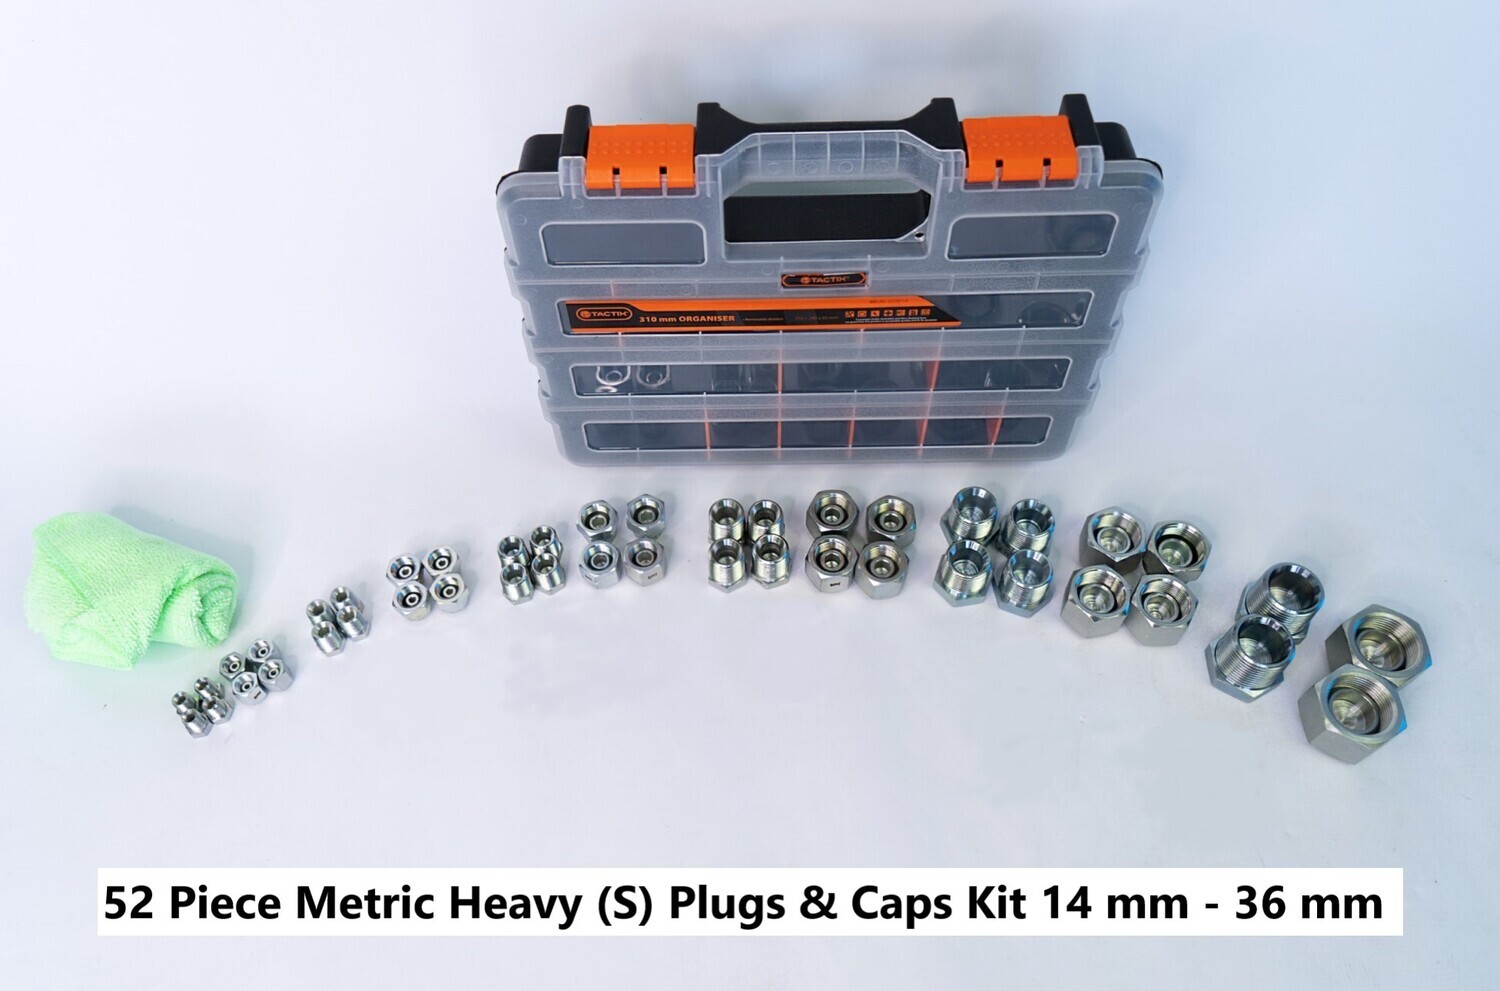 Chart Showing Layout and Quanties of Heavy (S) Metric Plugs and Caps in Plastic Case. 